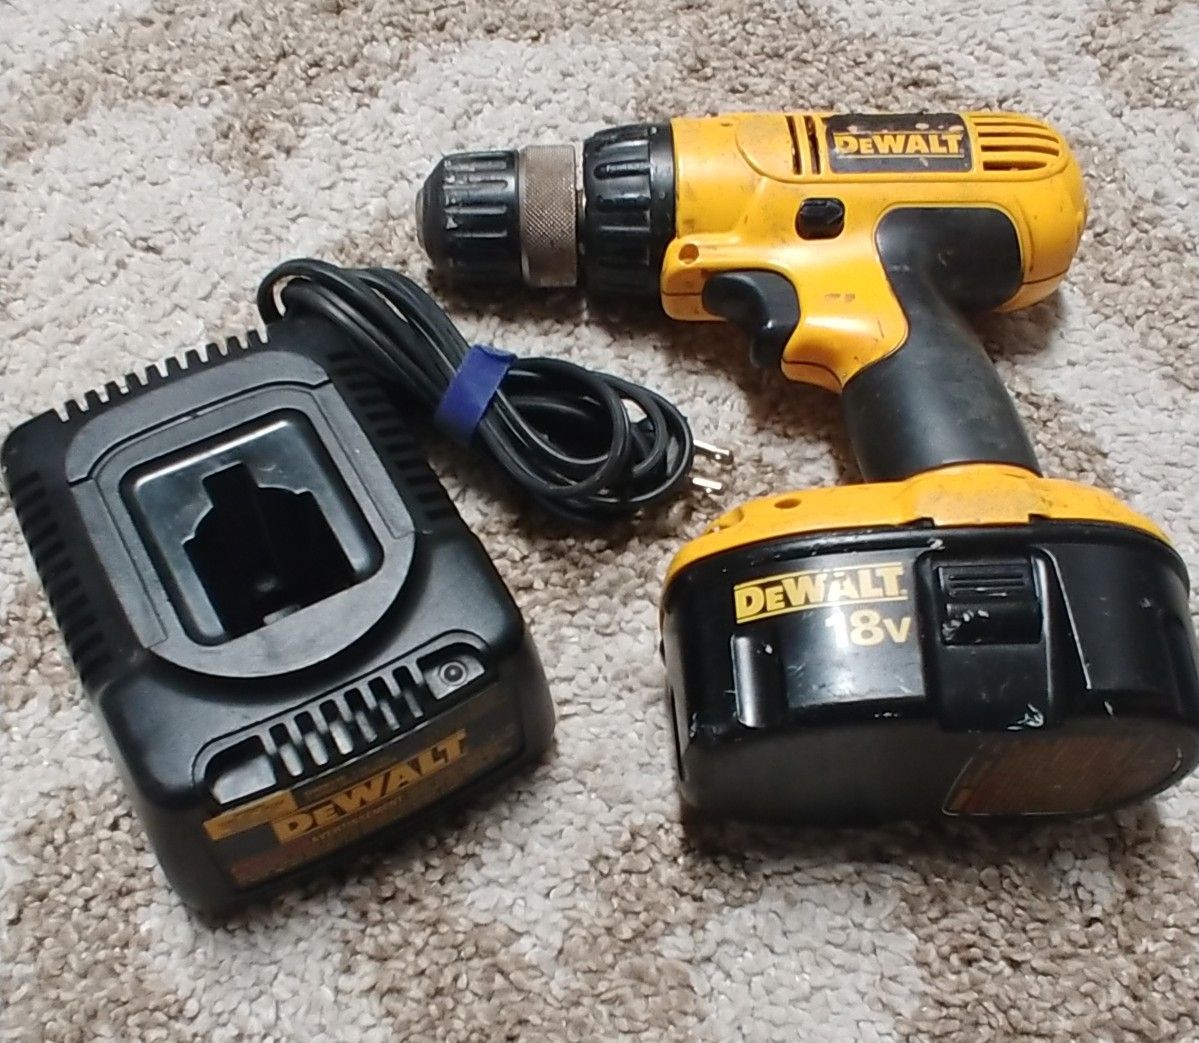 Dewalt 18 Volt Cordless Drill Driver with Battery and Charger